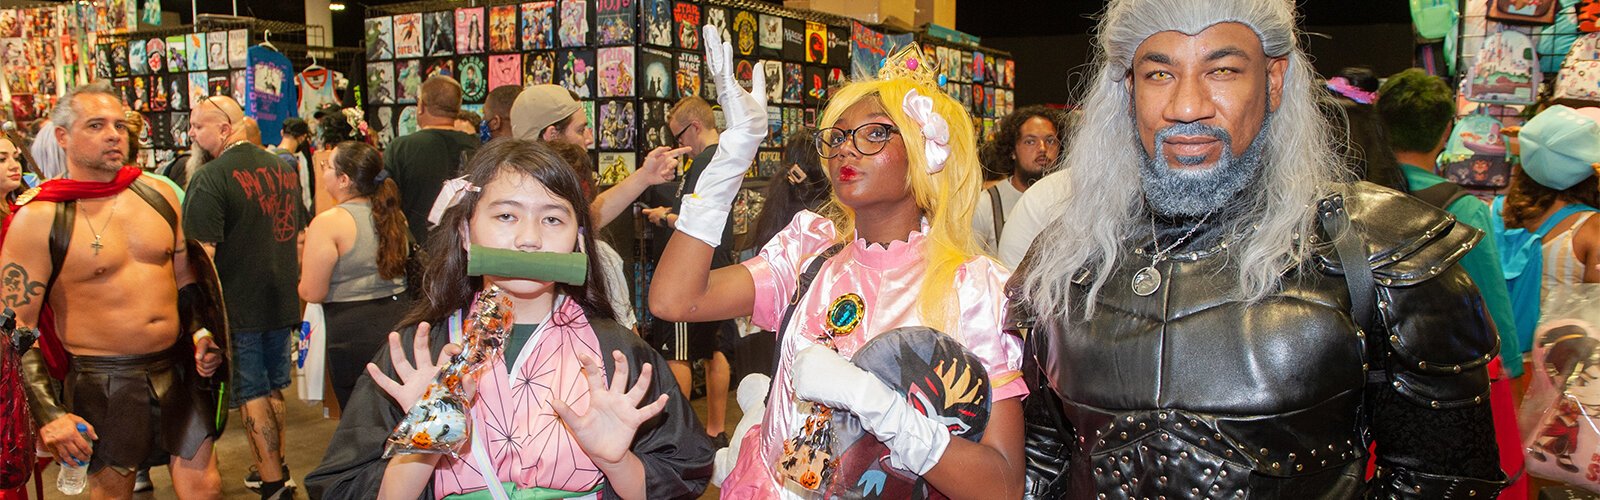 Dressed as The Witcher, Chris Warren brought his daughter, who dressed as Princess Peach, and her friend, who went as Nezuko Kamadod, to the Tampa Bay Comic Con.